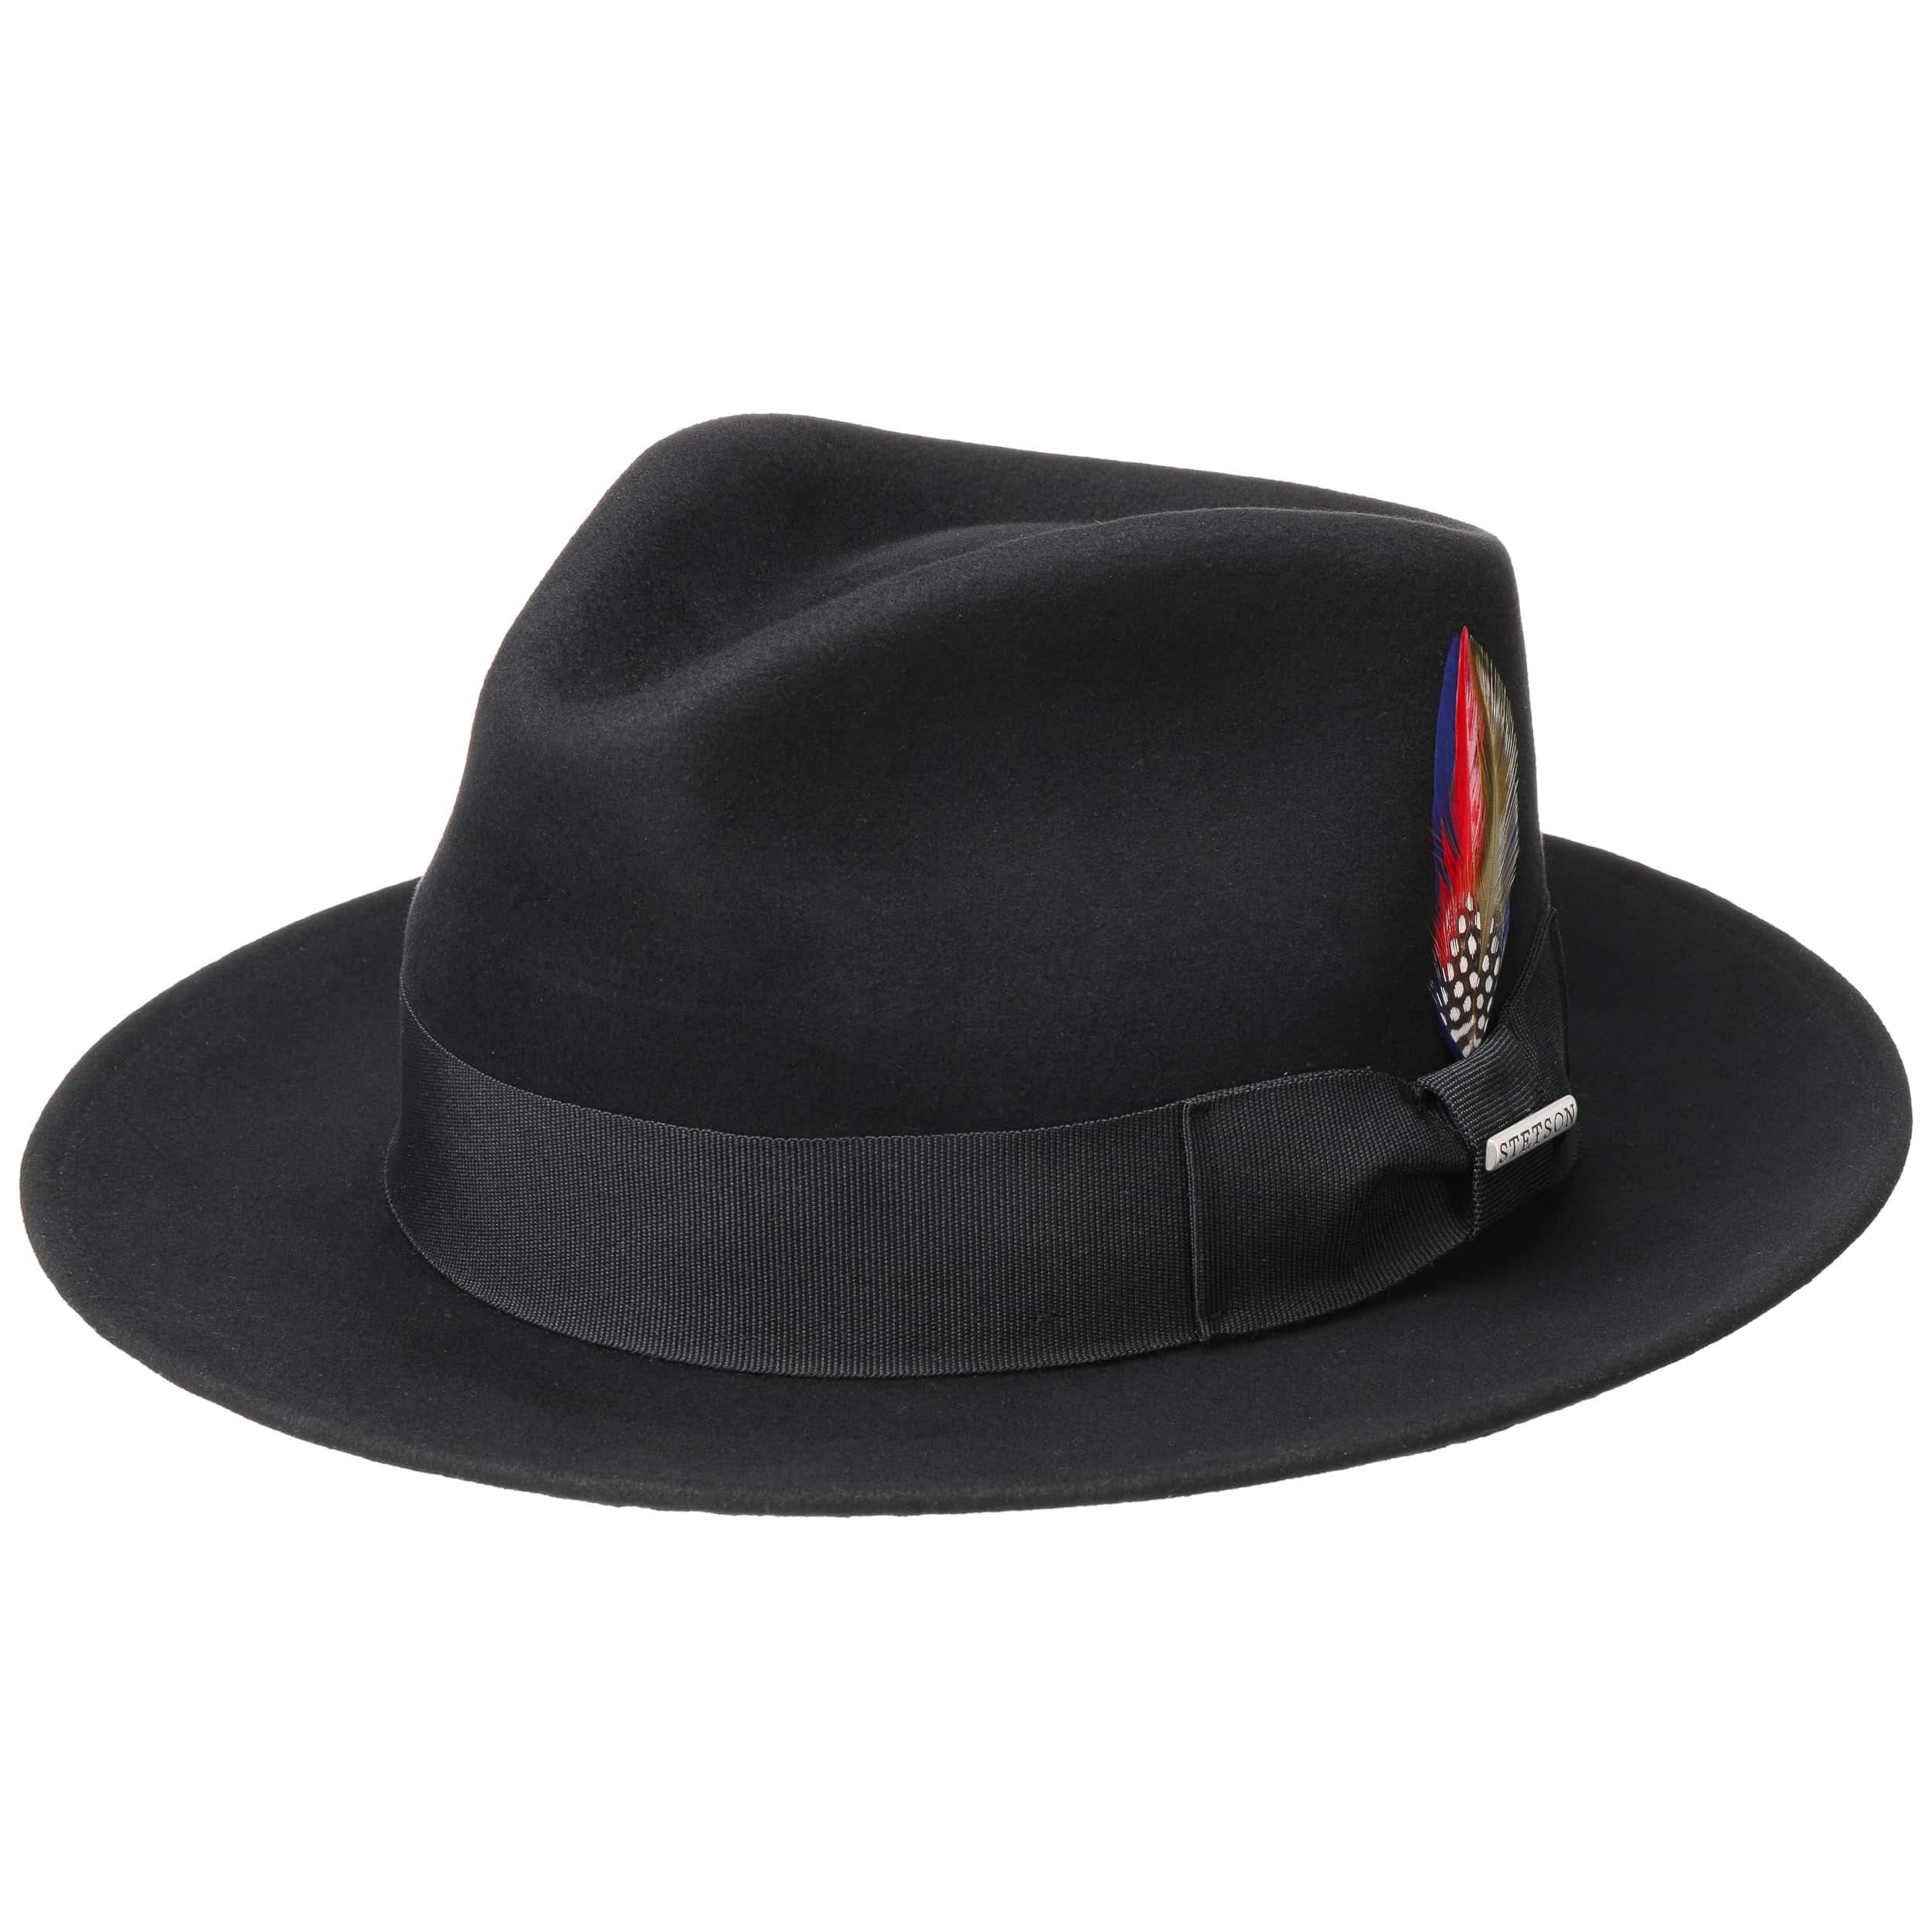 Wool & Cashmere Fedora Hat by Stetson - 119,00